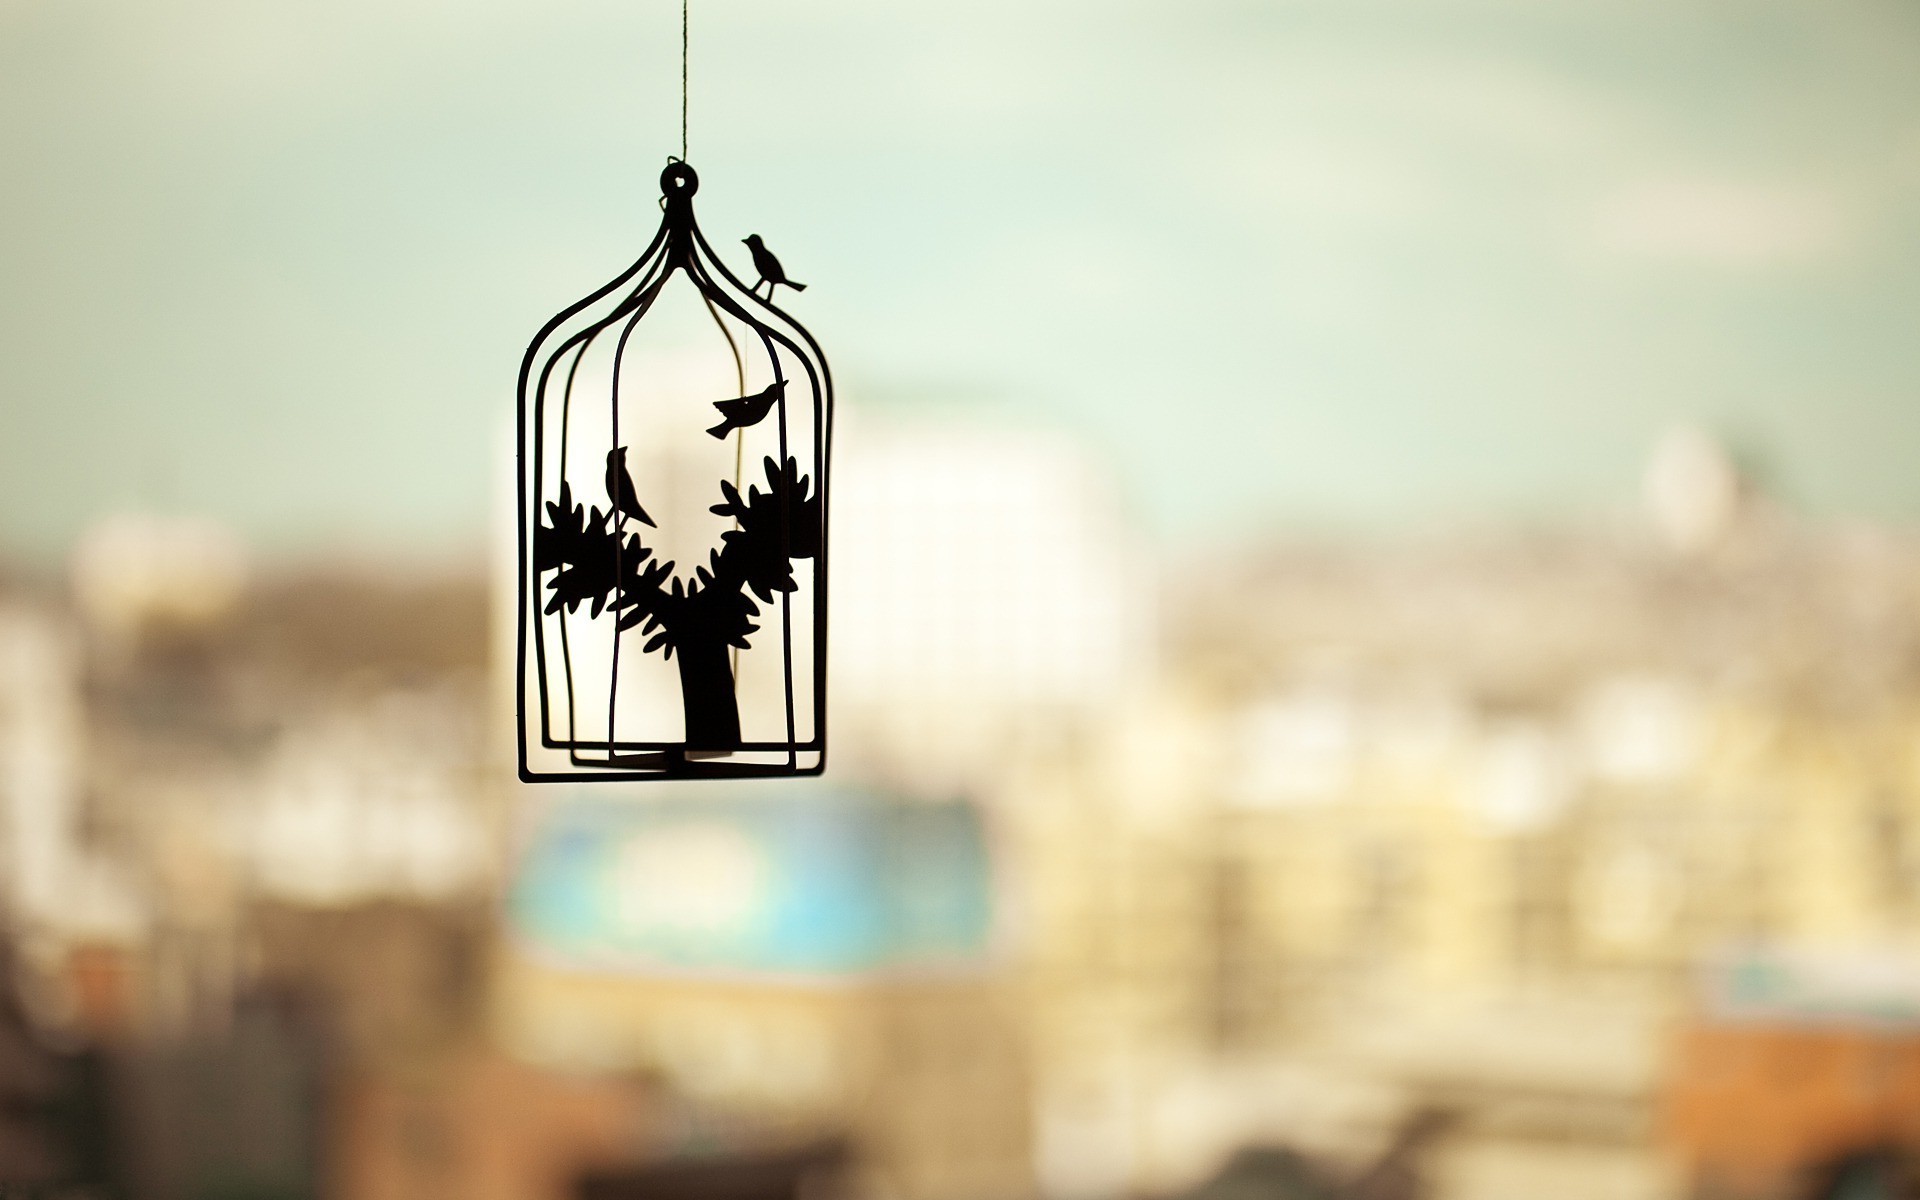 photography silhouette cages birds trees depth of field cityscape Wallpaper